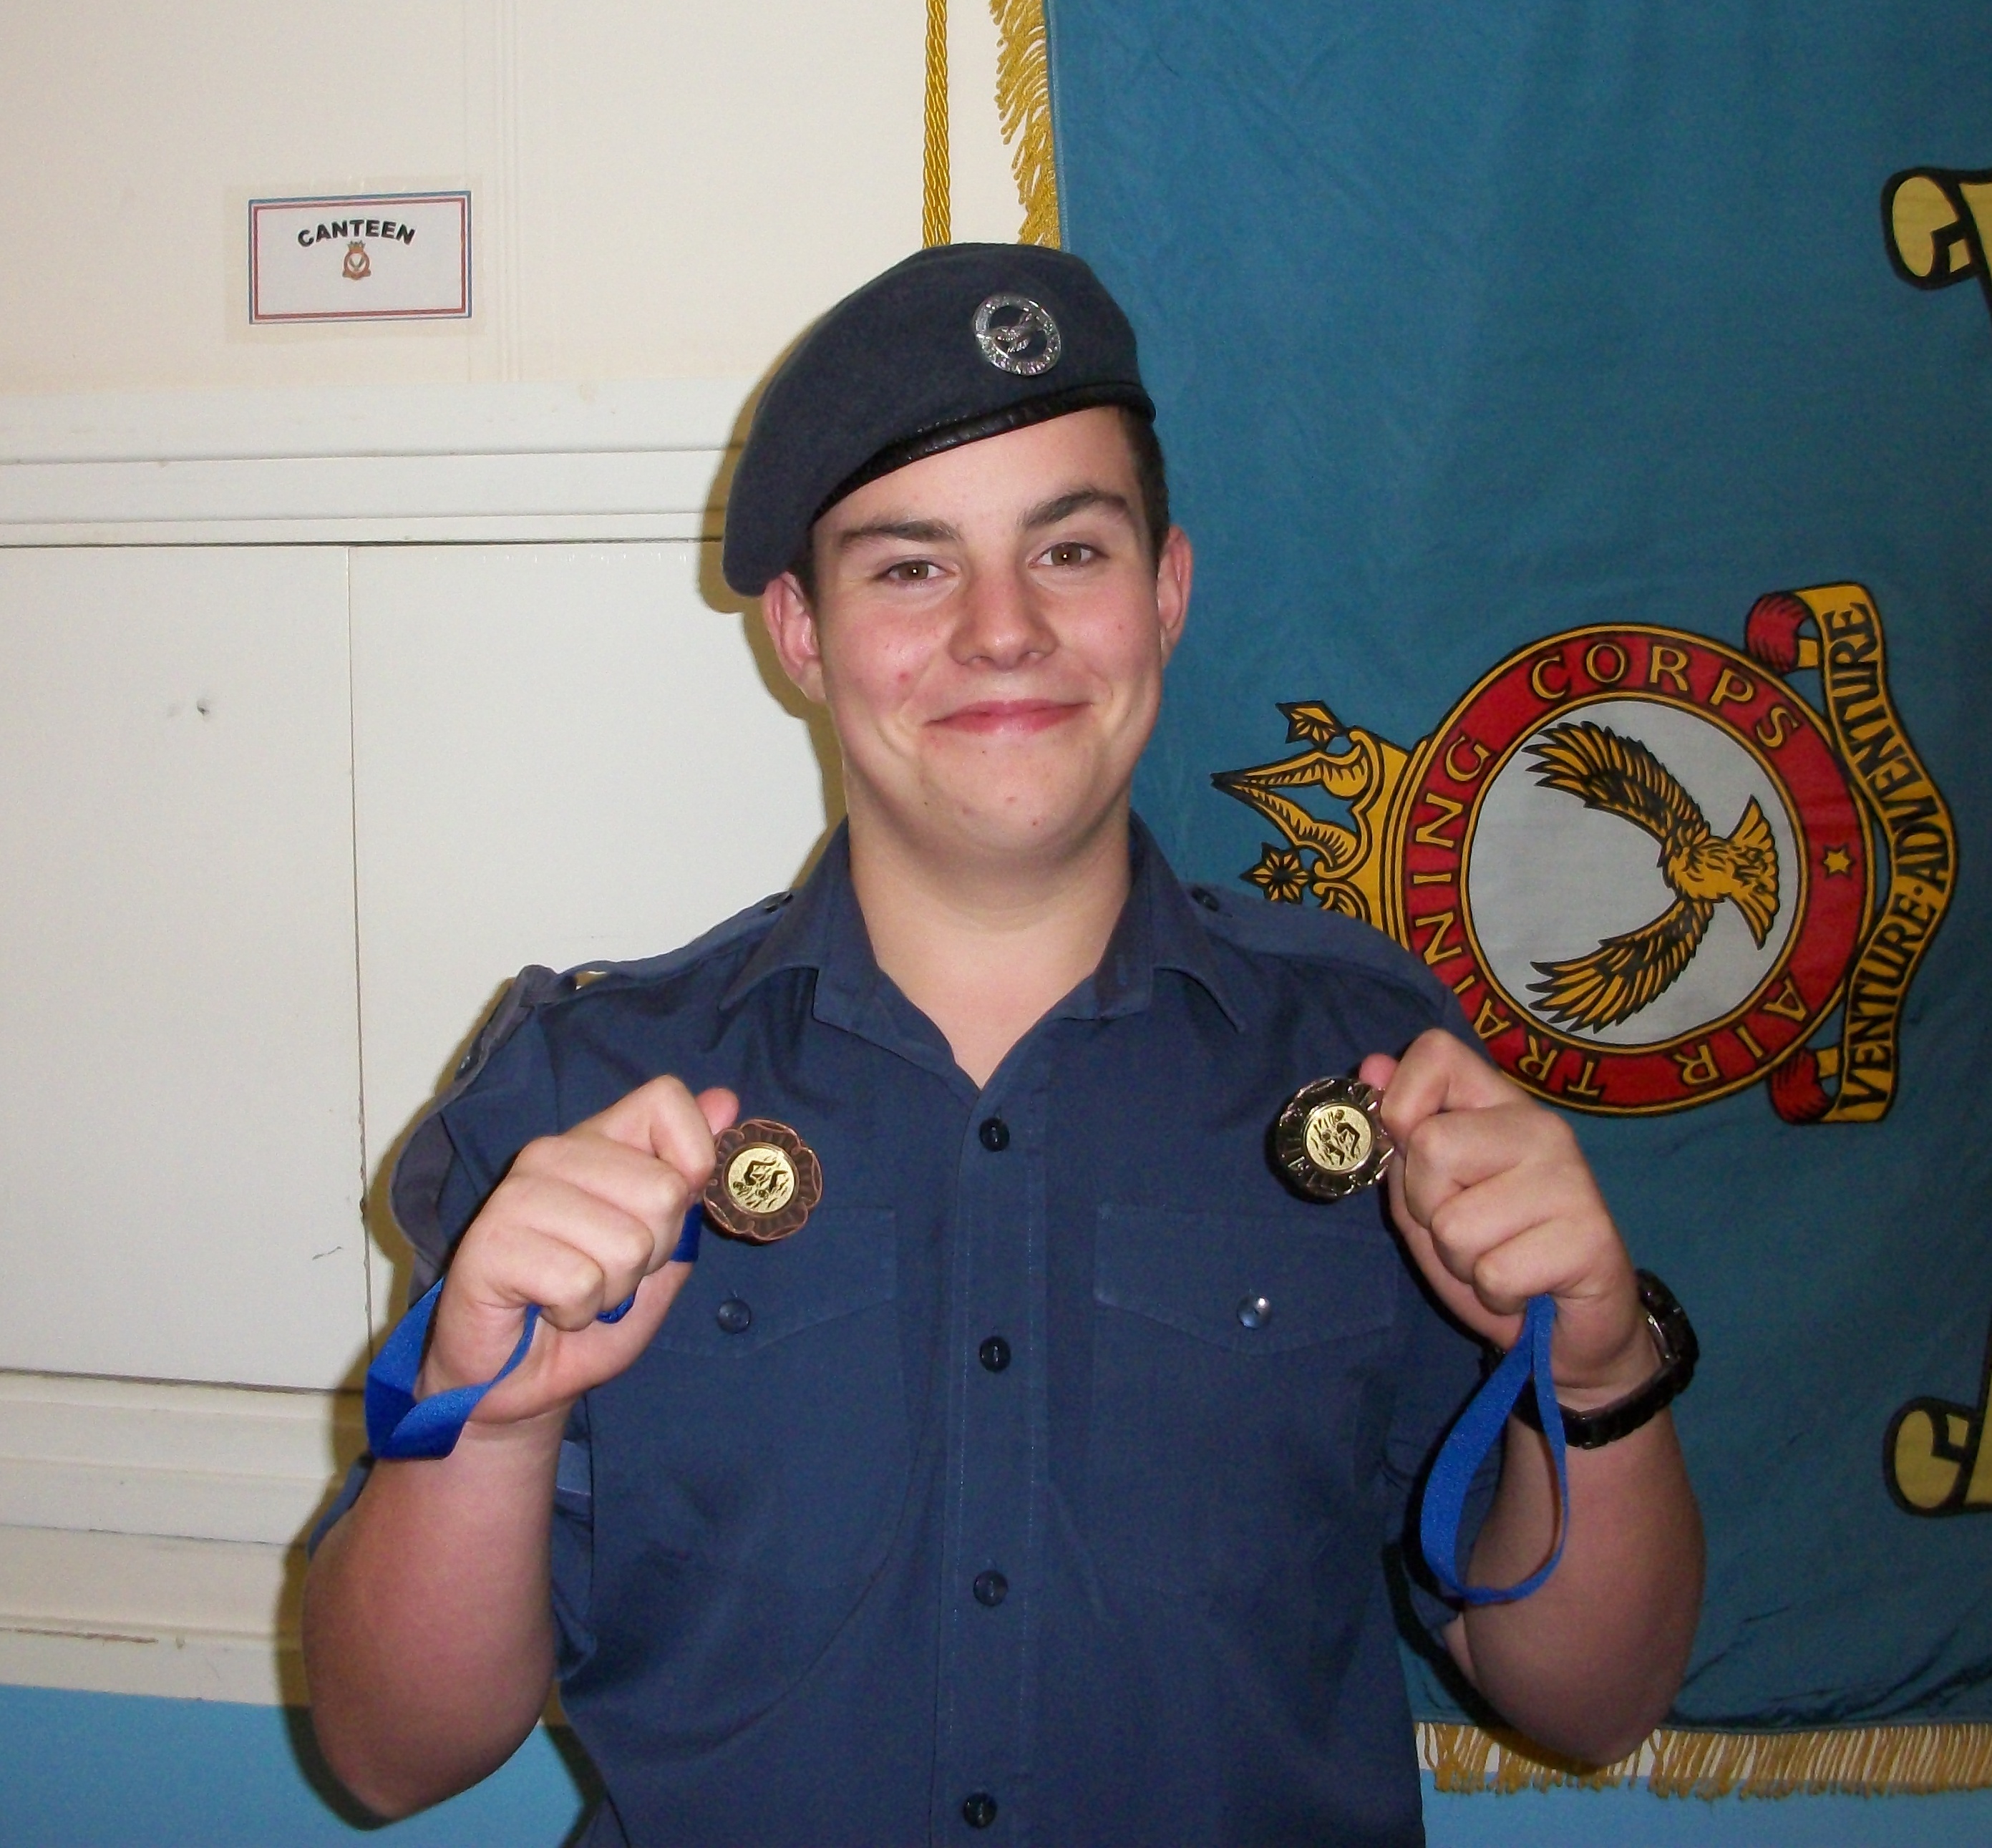 Cadet Newman with his medals